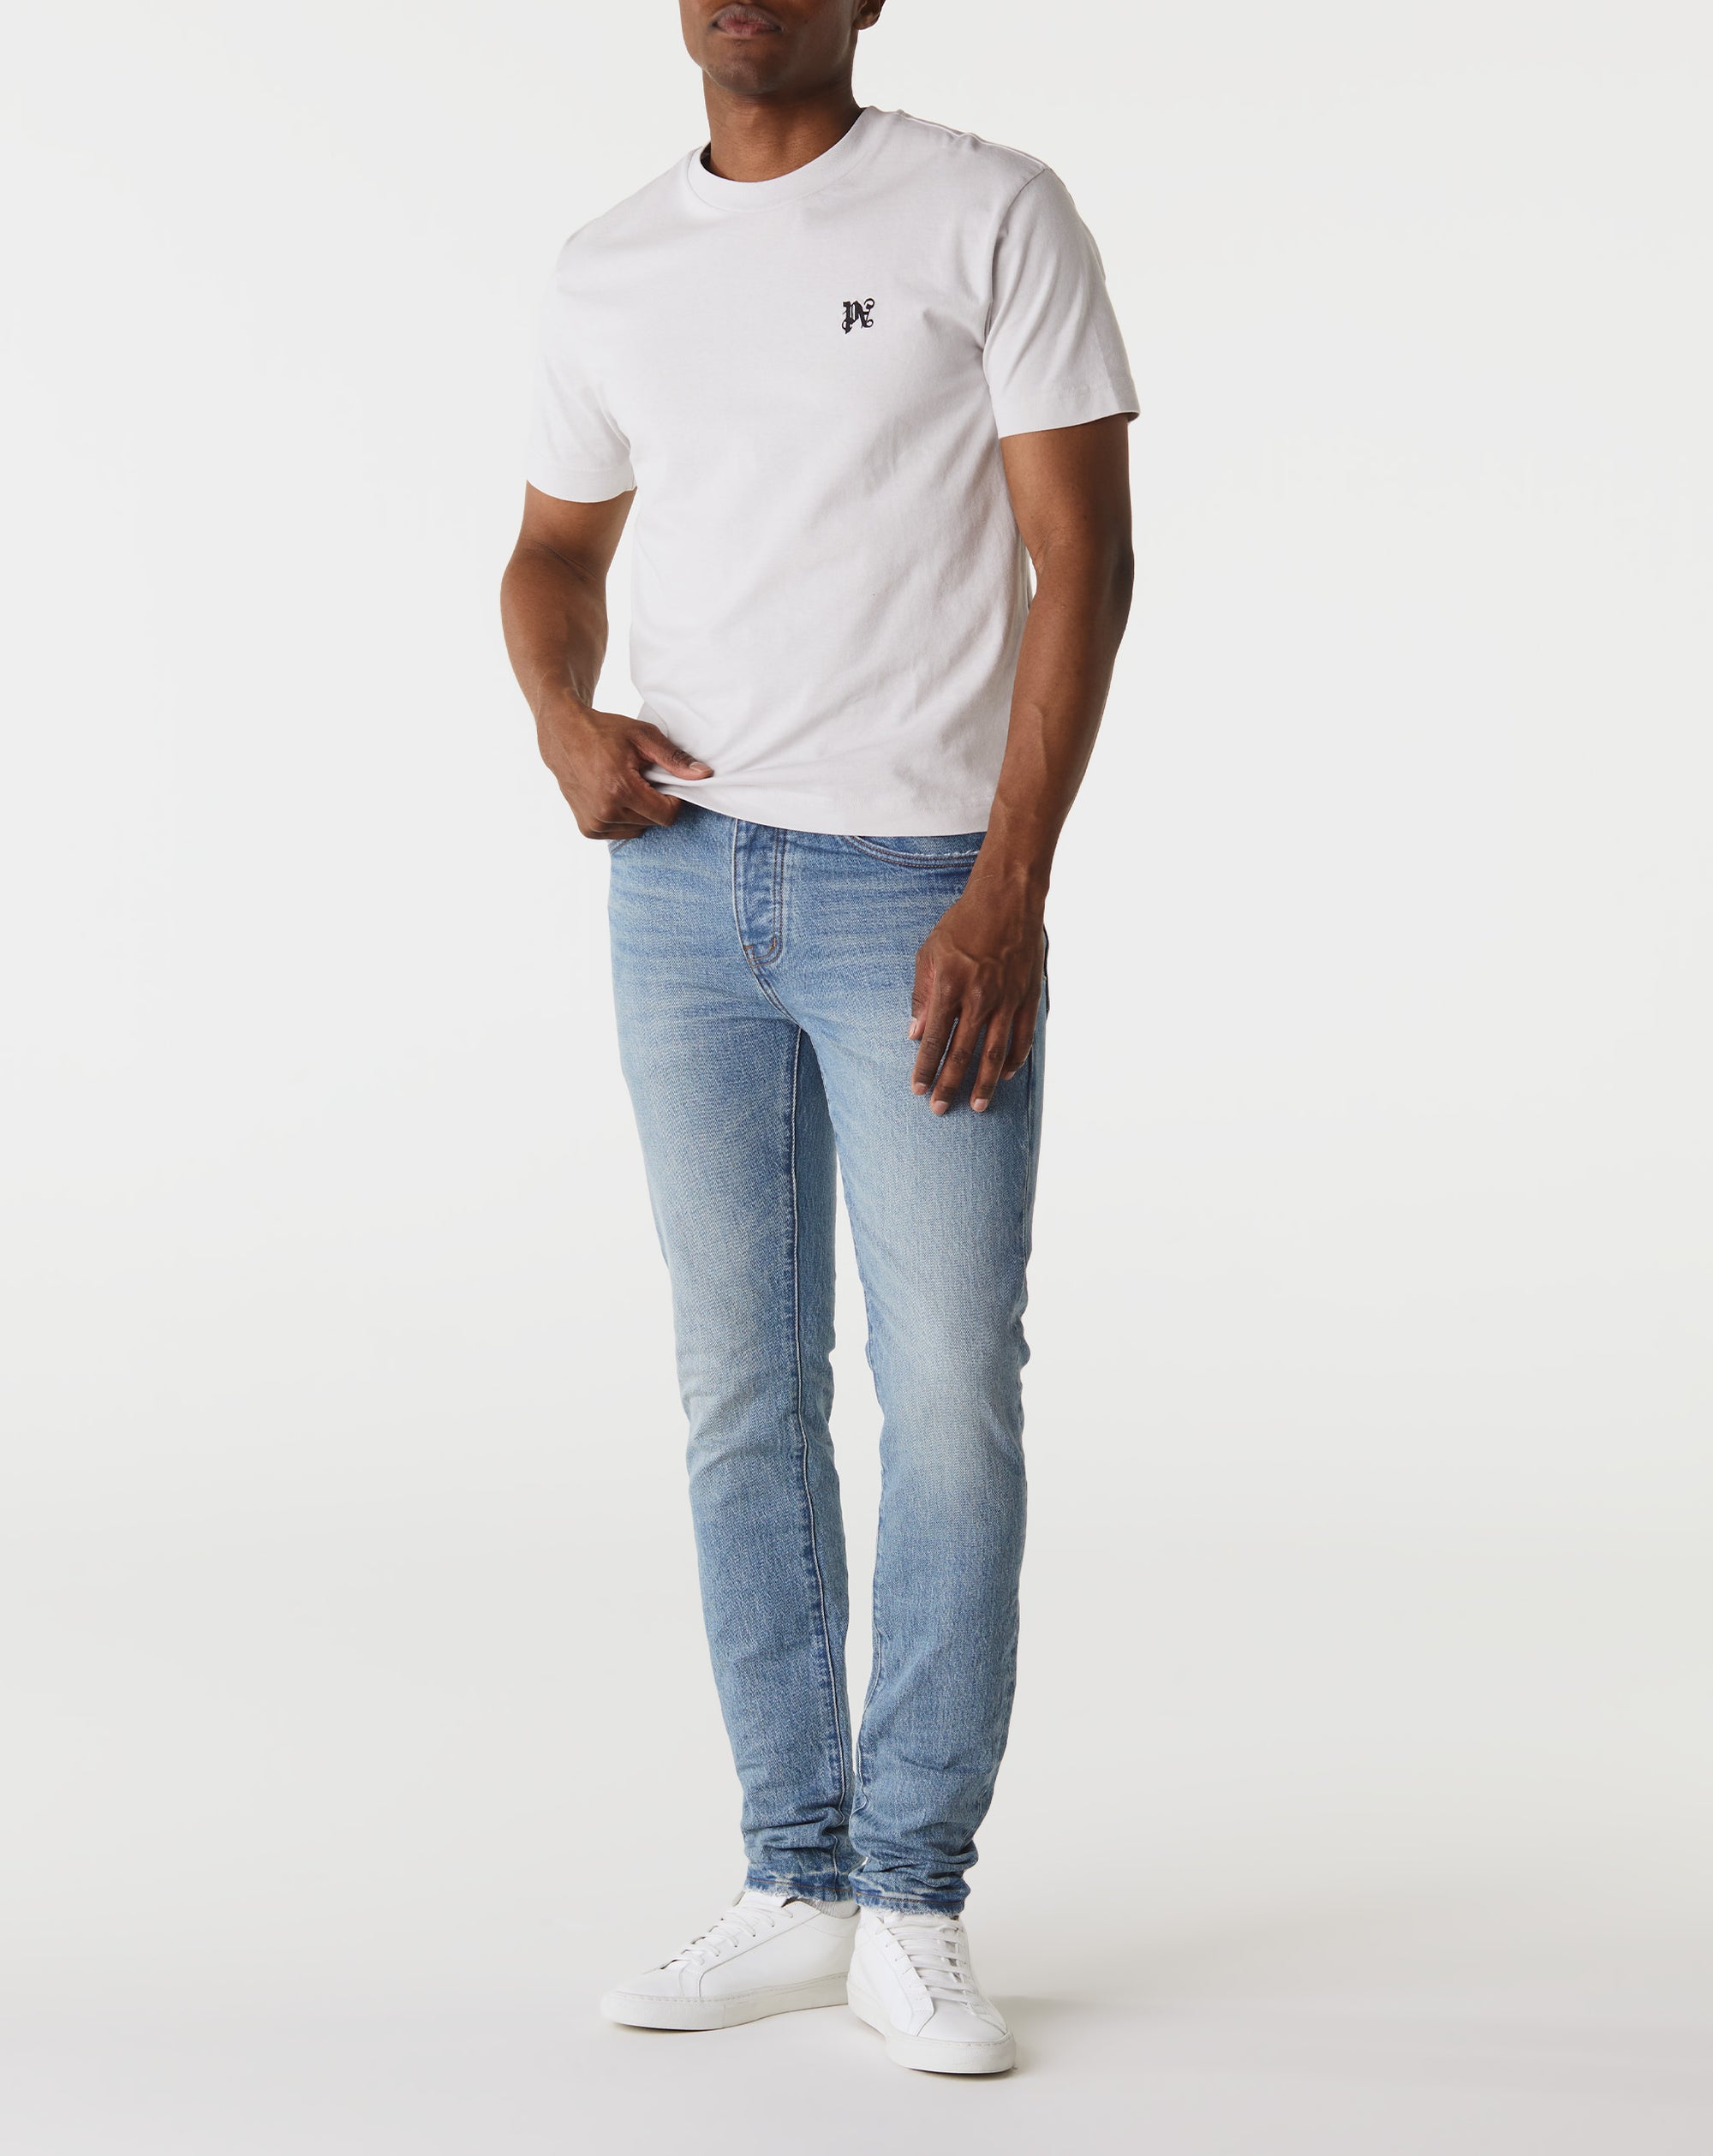 P001 Low Rise Slim Jeans - Rule of Next